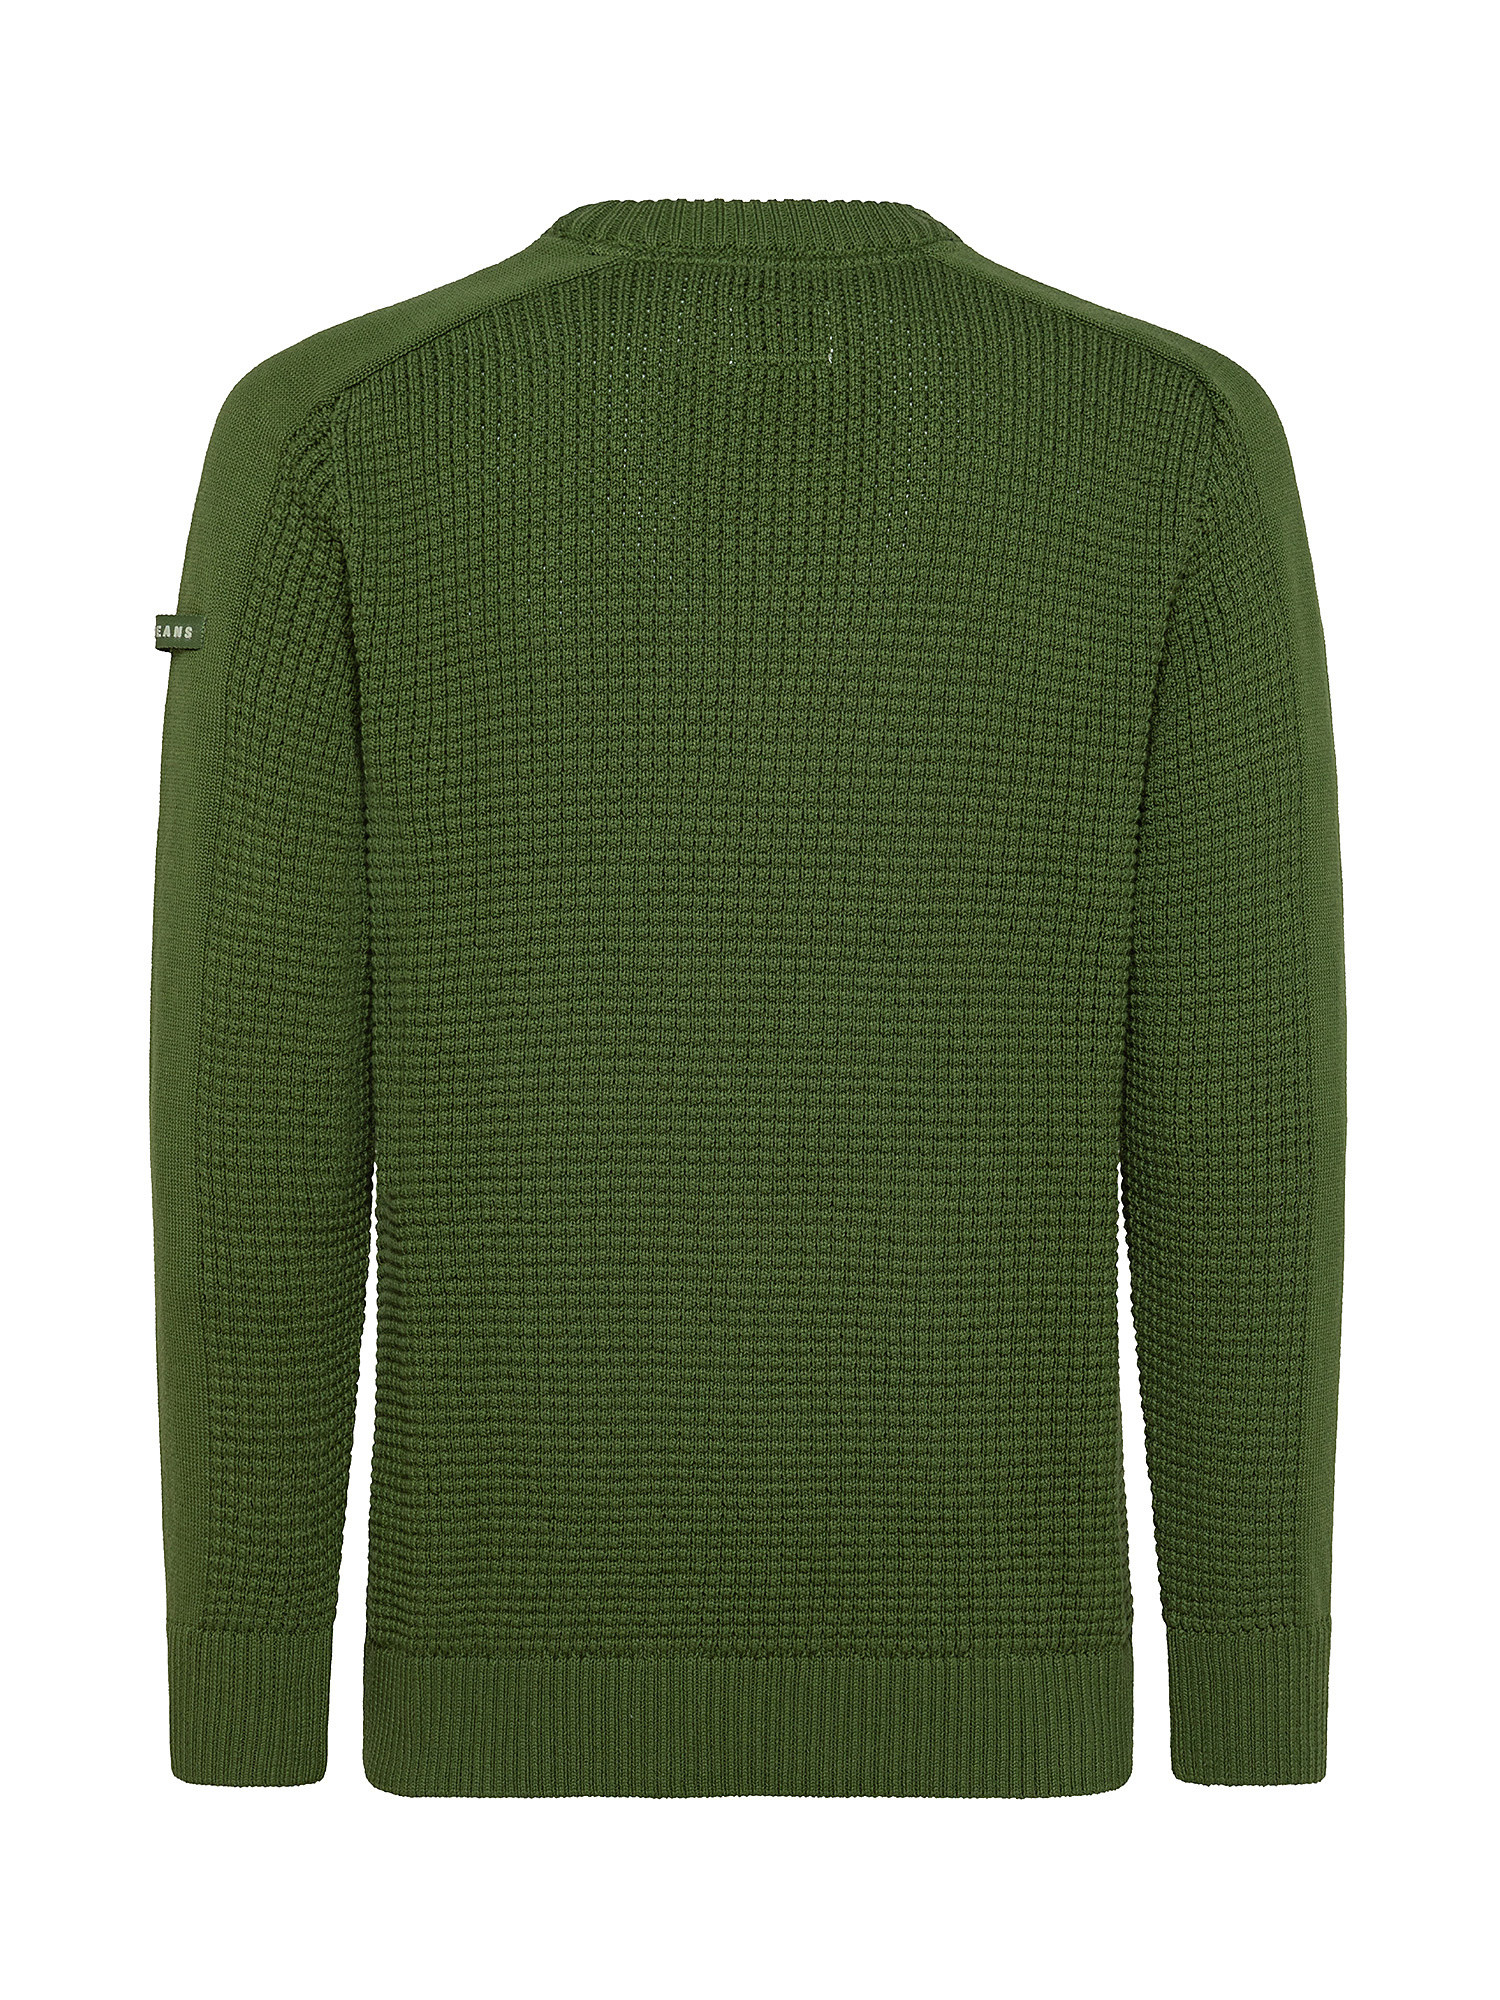 Moises contrast pullover, Dark Green, large image number 1